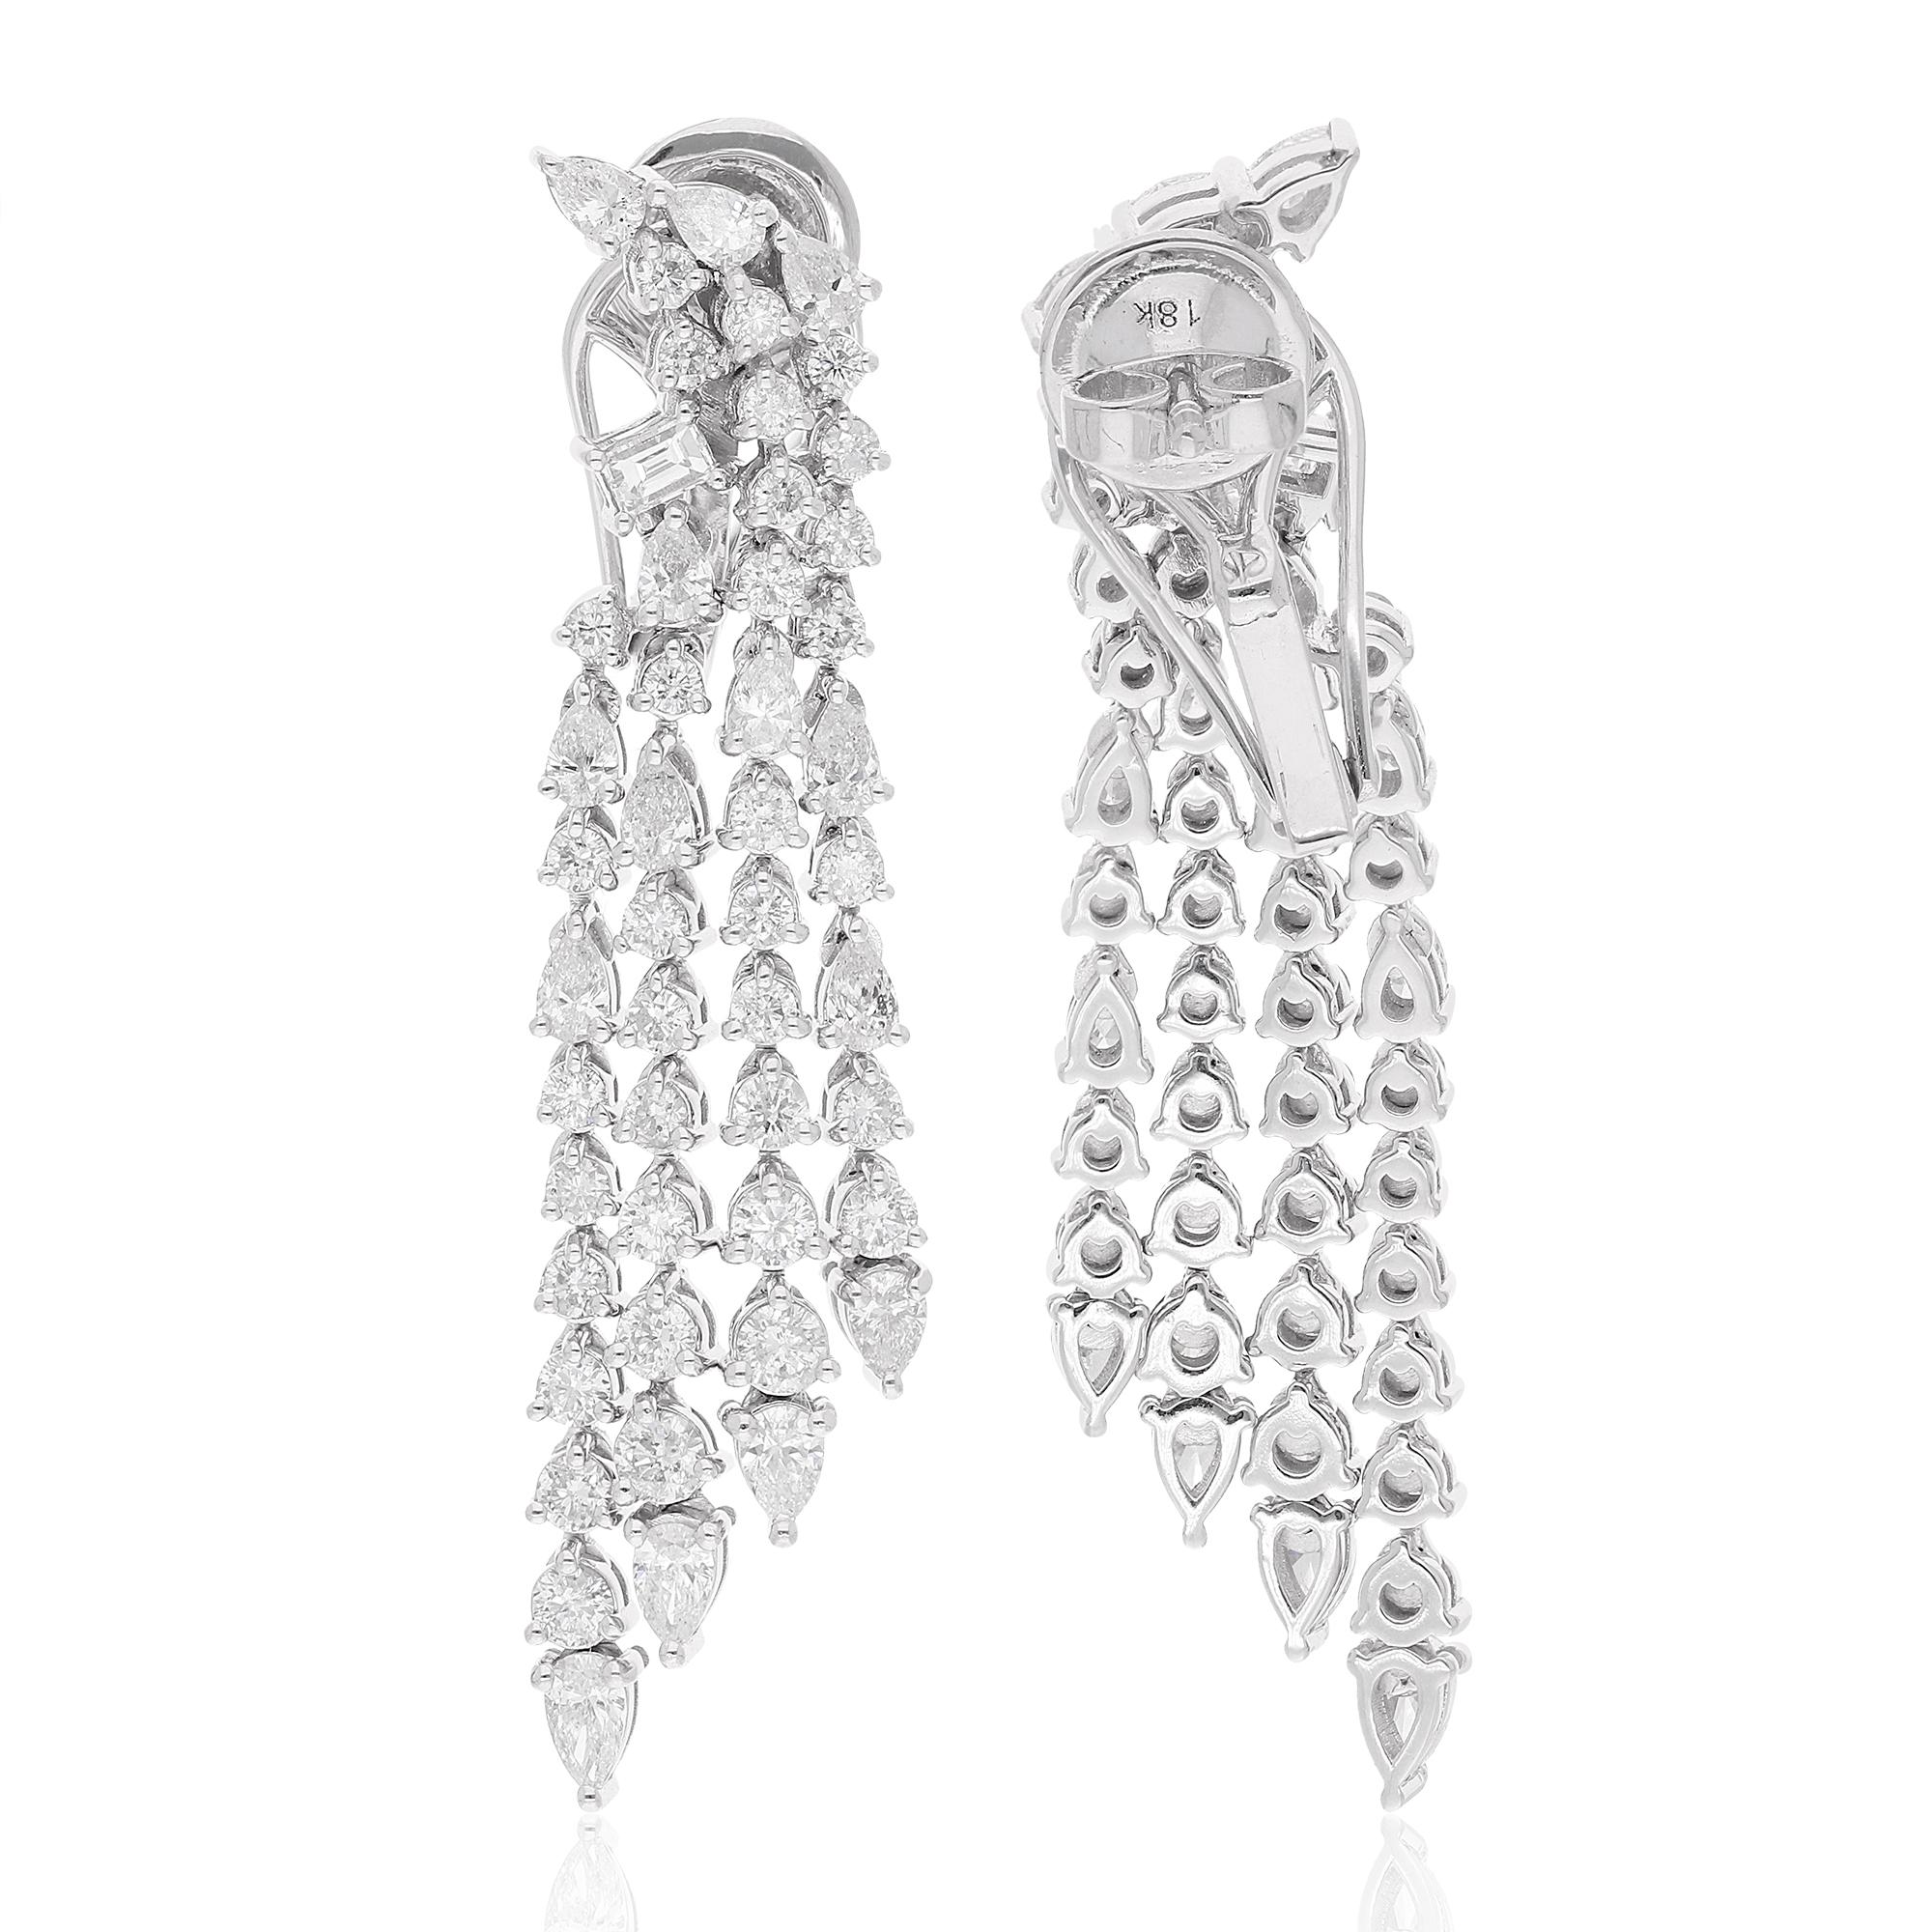 The dangle design of these earrings creates a sense of fluidity and grace, allowing the diamonds to catch the light from every angle. Crafted with meticulous attention to detail, these earrings are designed to make a statement while remaining